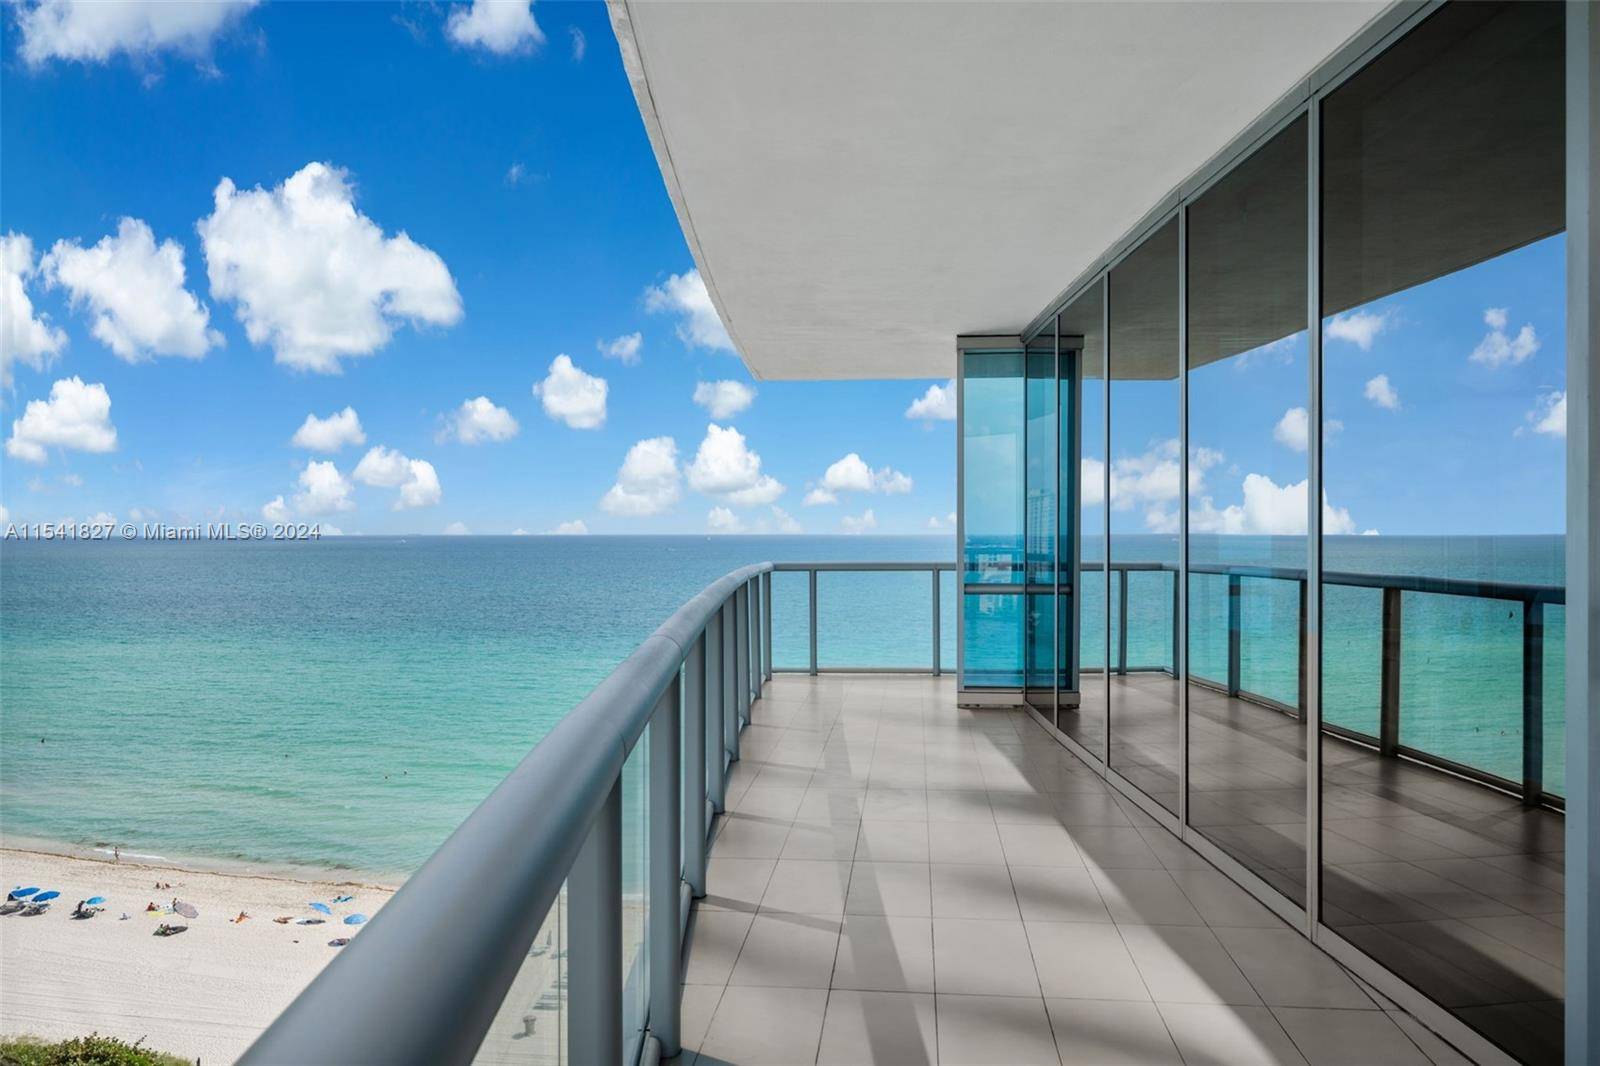 Nestled along the pristine shores of Sunny Isles Beach, this stunning 3BD 3.